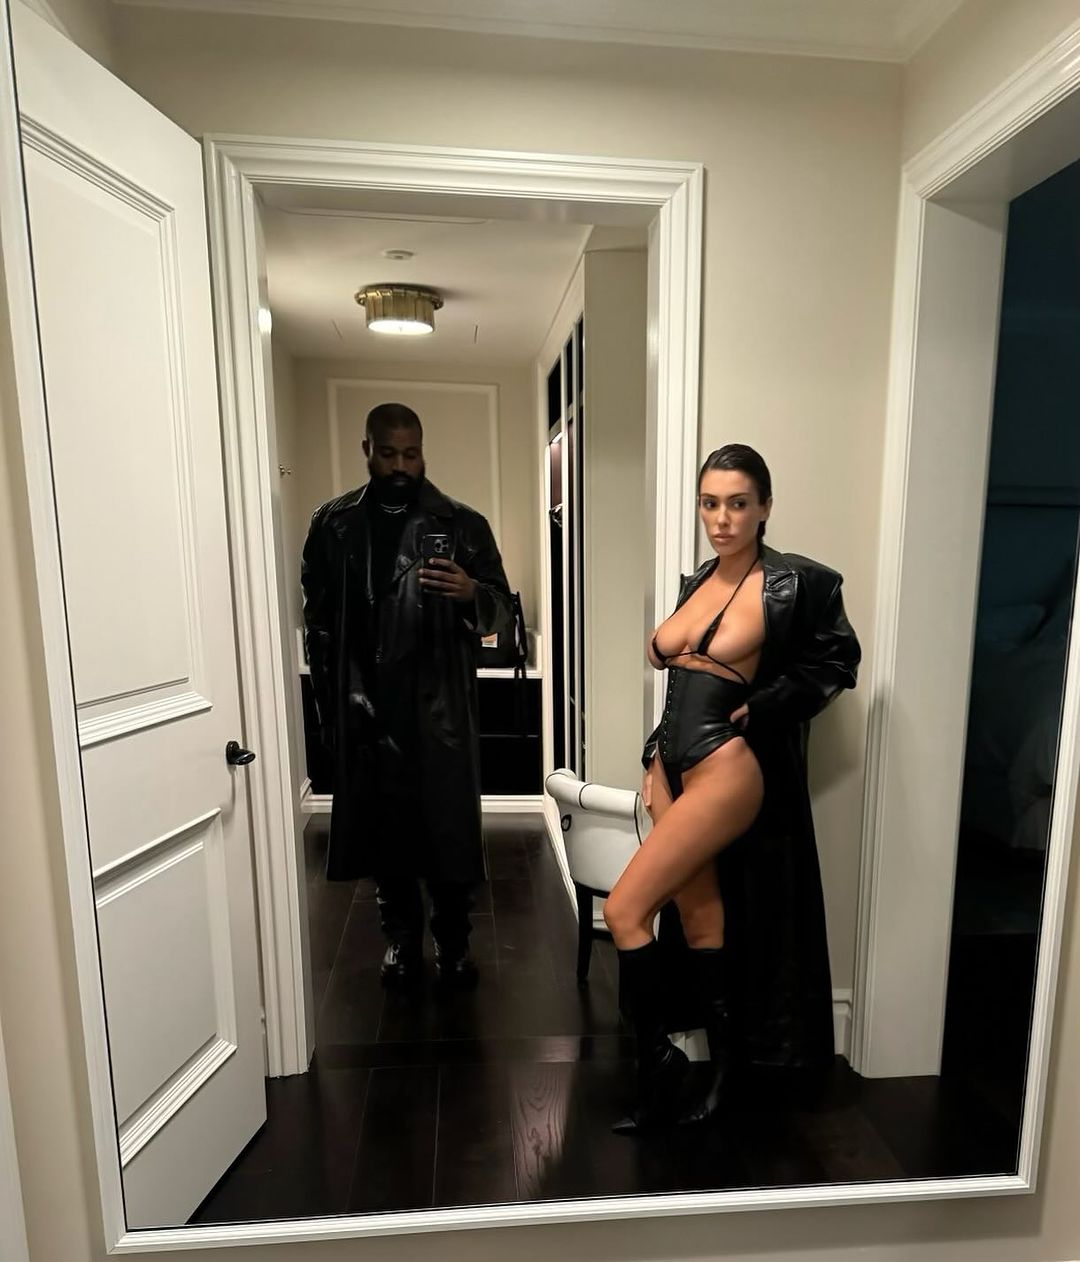 Ye Declares “No Pants This Year” As He Shares Revealing Snaps of His Wife Bianca! - Photo 2